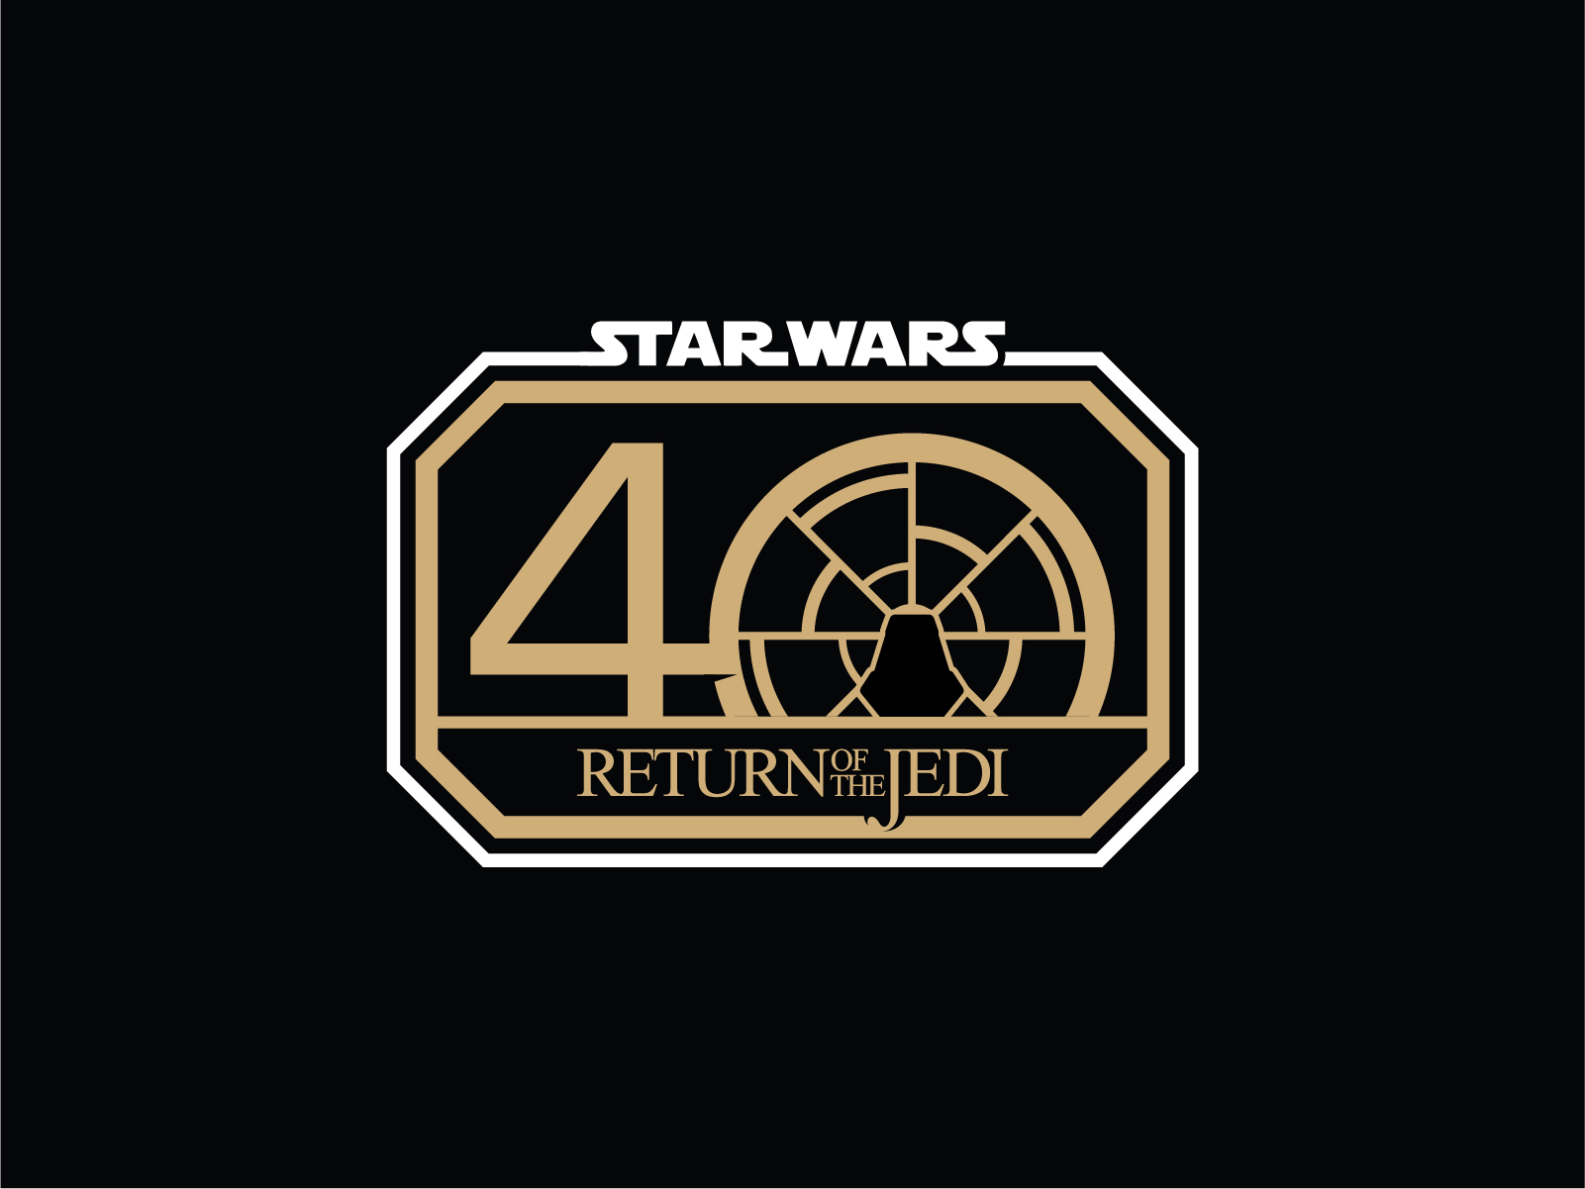 Return of the Jedi 40th Anniversary by Matthew Doyle on Dribbble